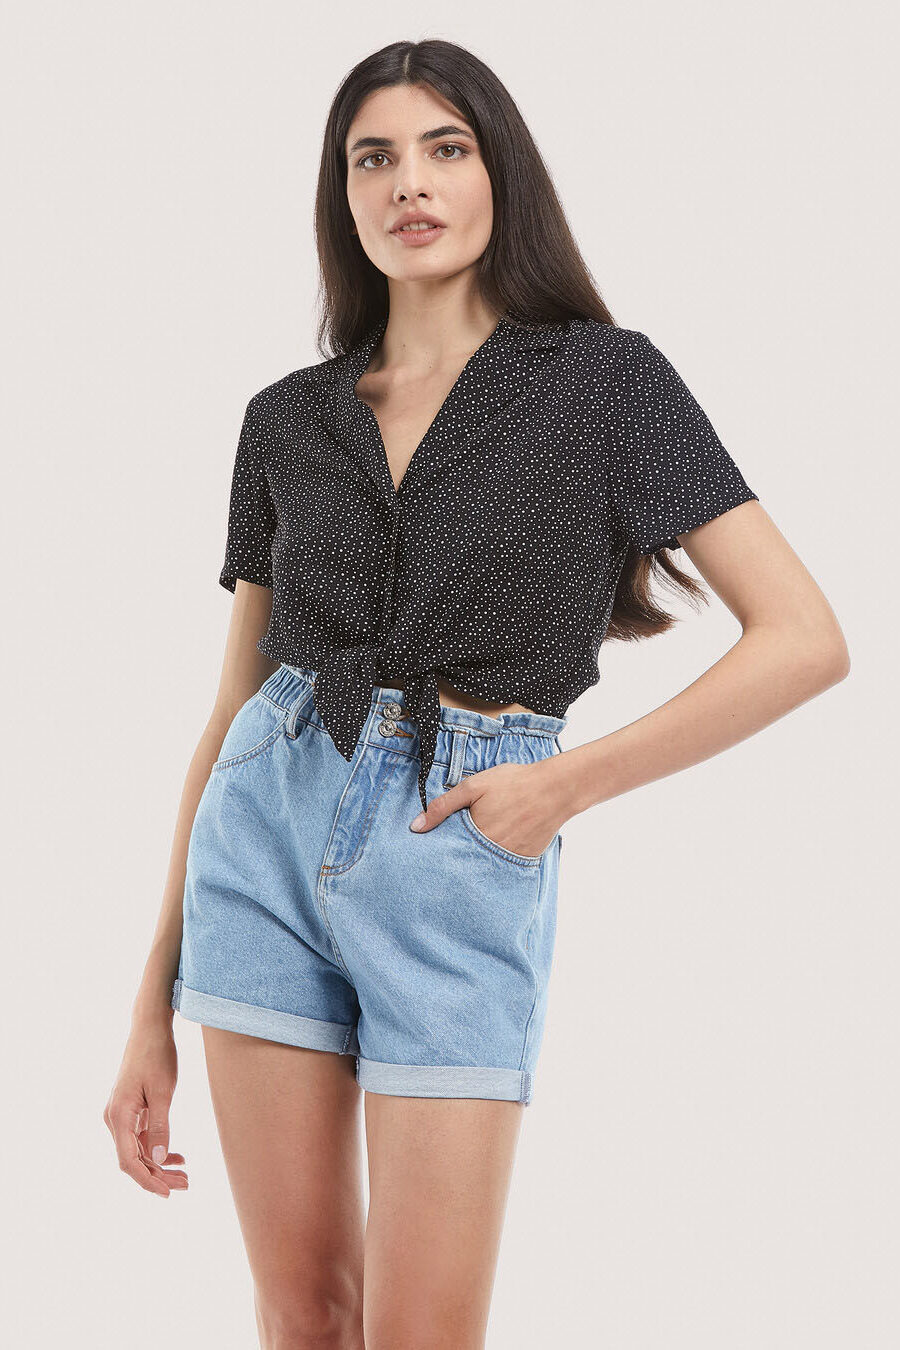 mauro black polka dots cropped top made in italy me desimo sth mesh